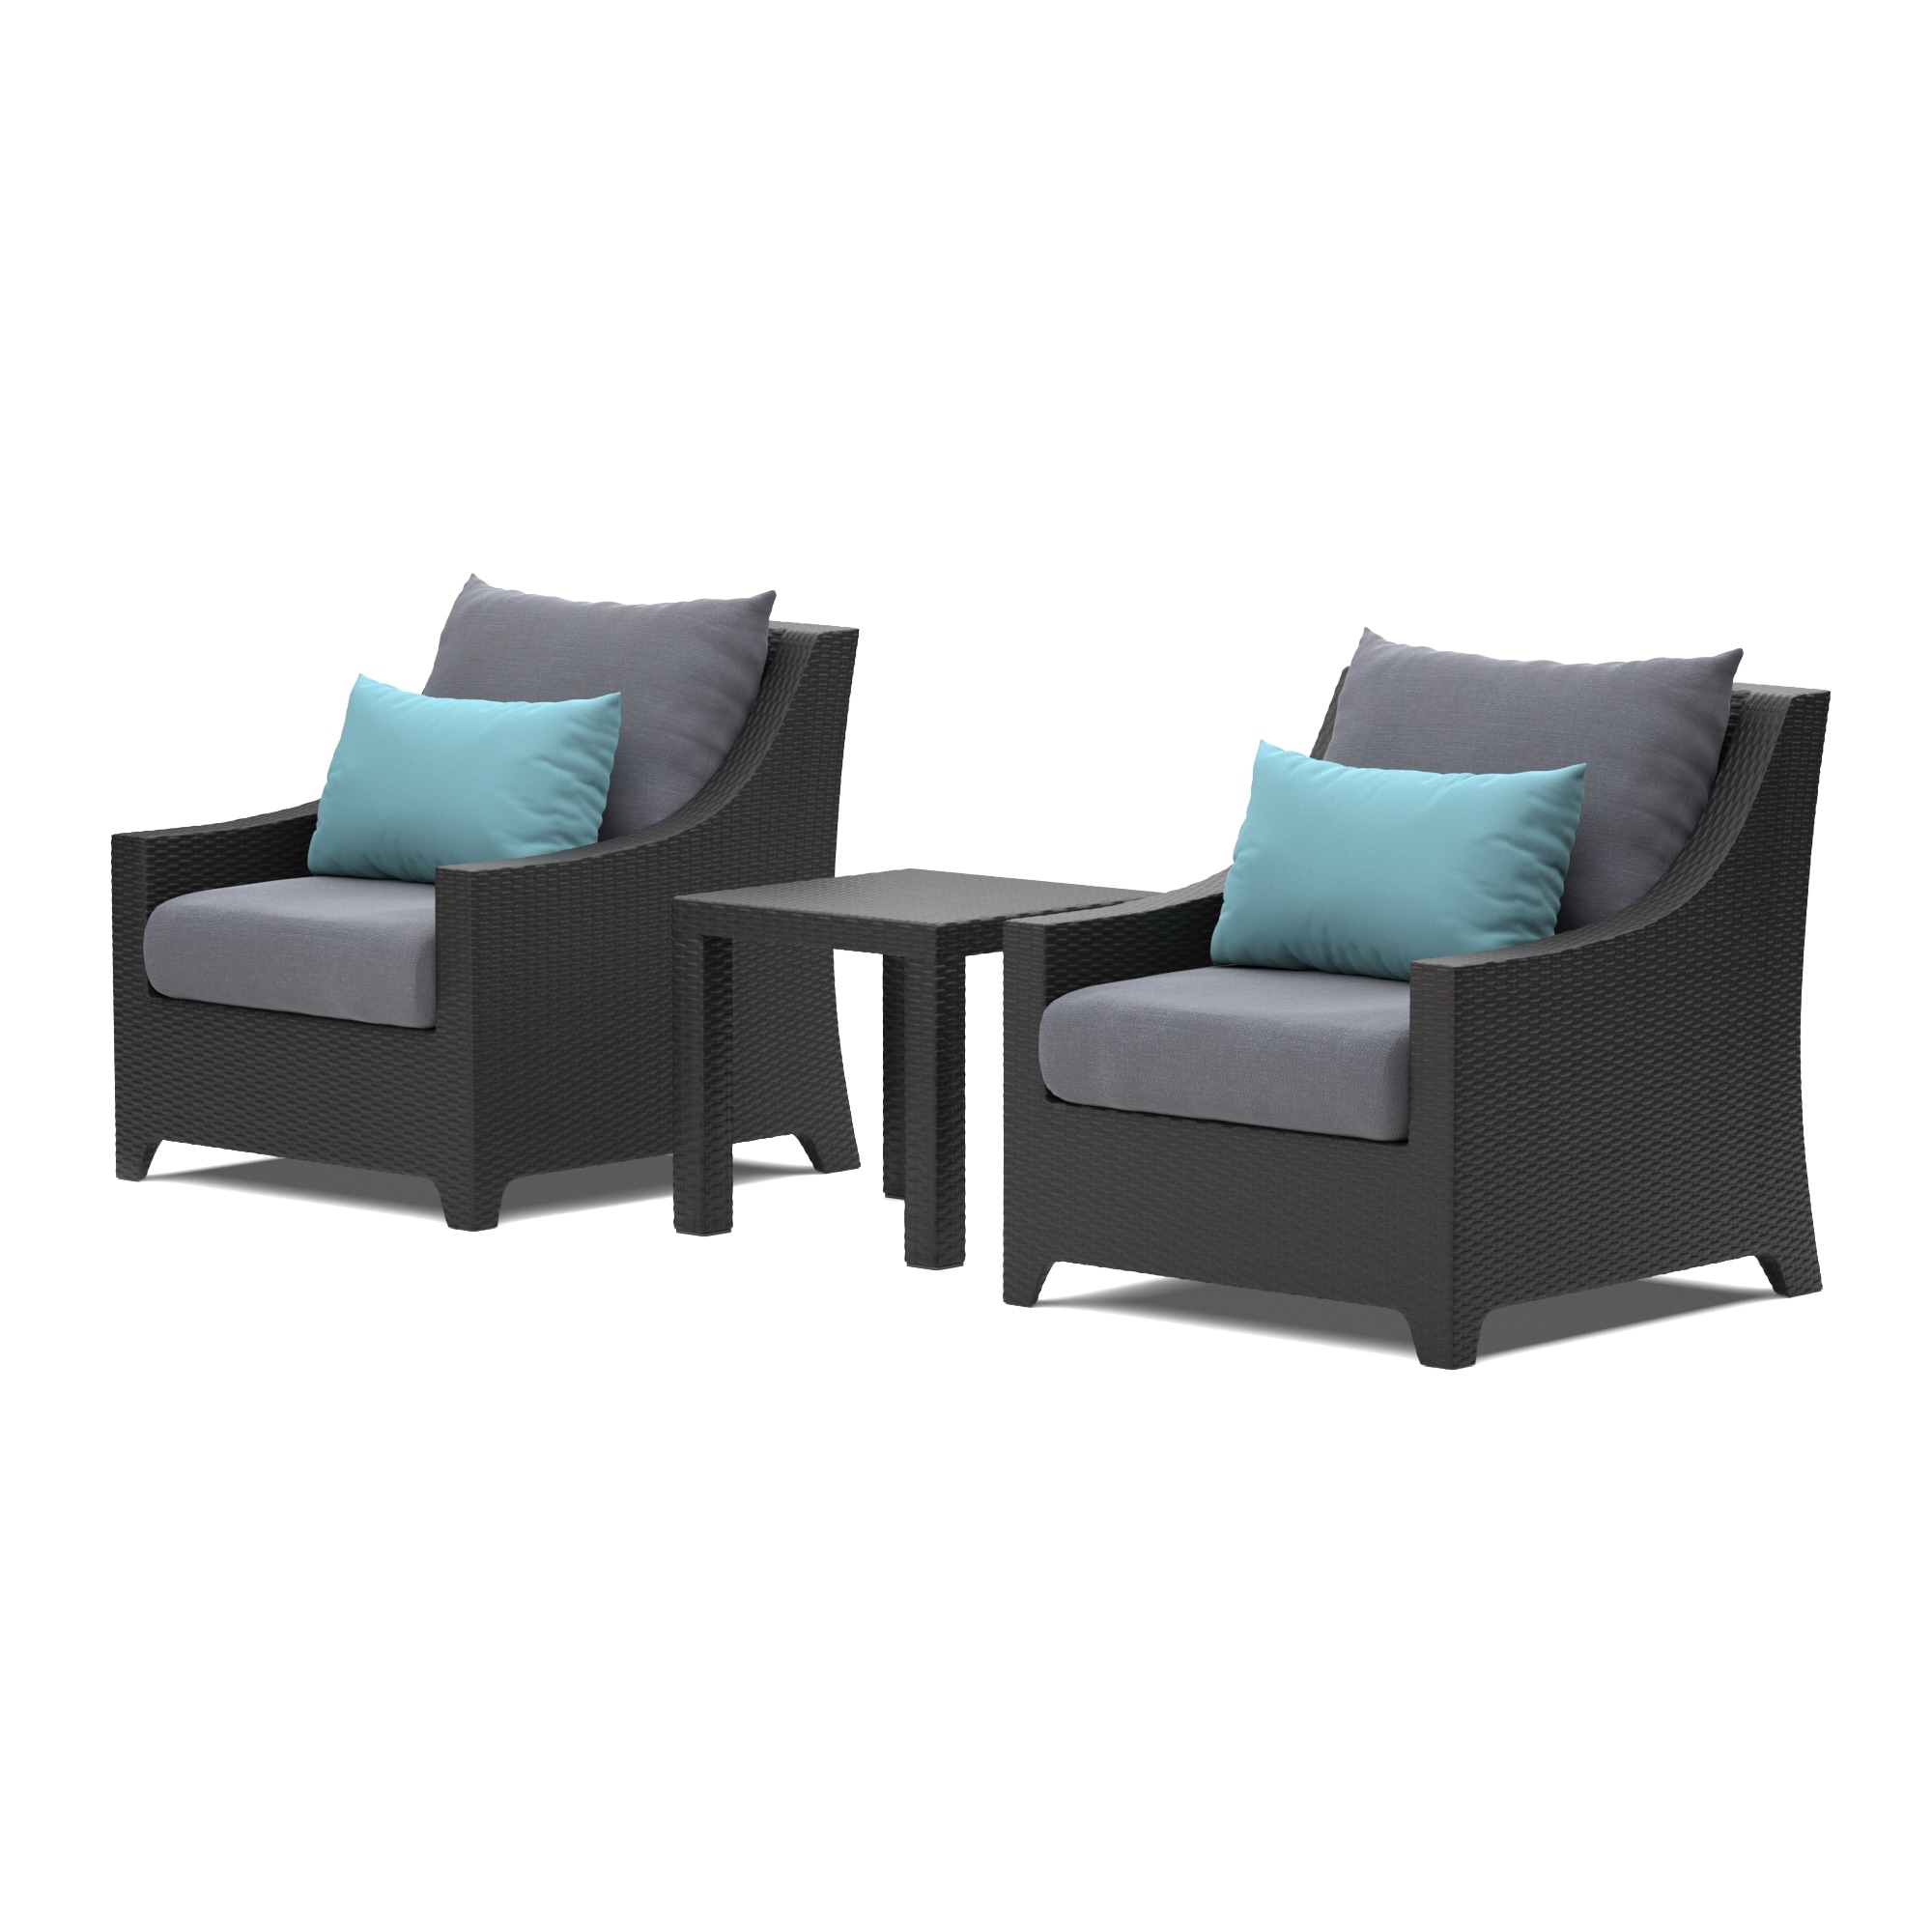 Deco 3 Piece Aluminum Outdoor Patio Club Chairs And Side Table